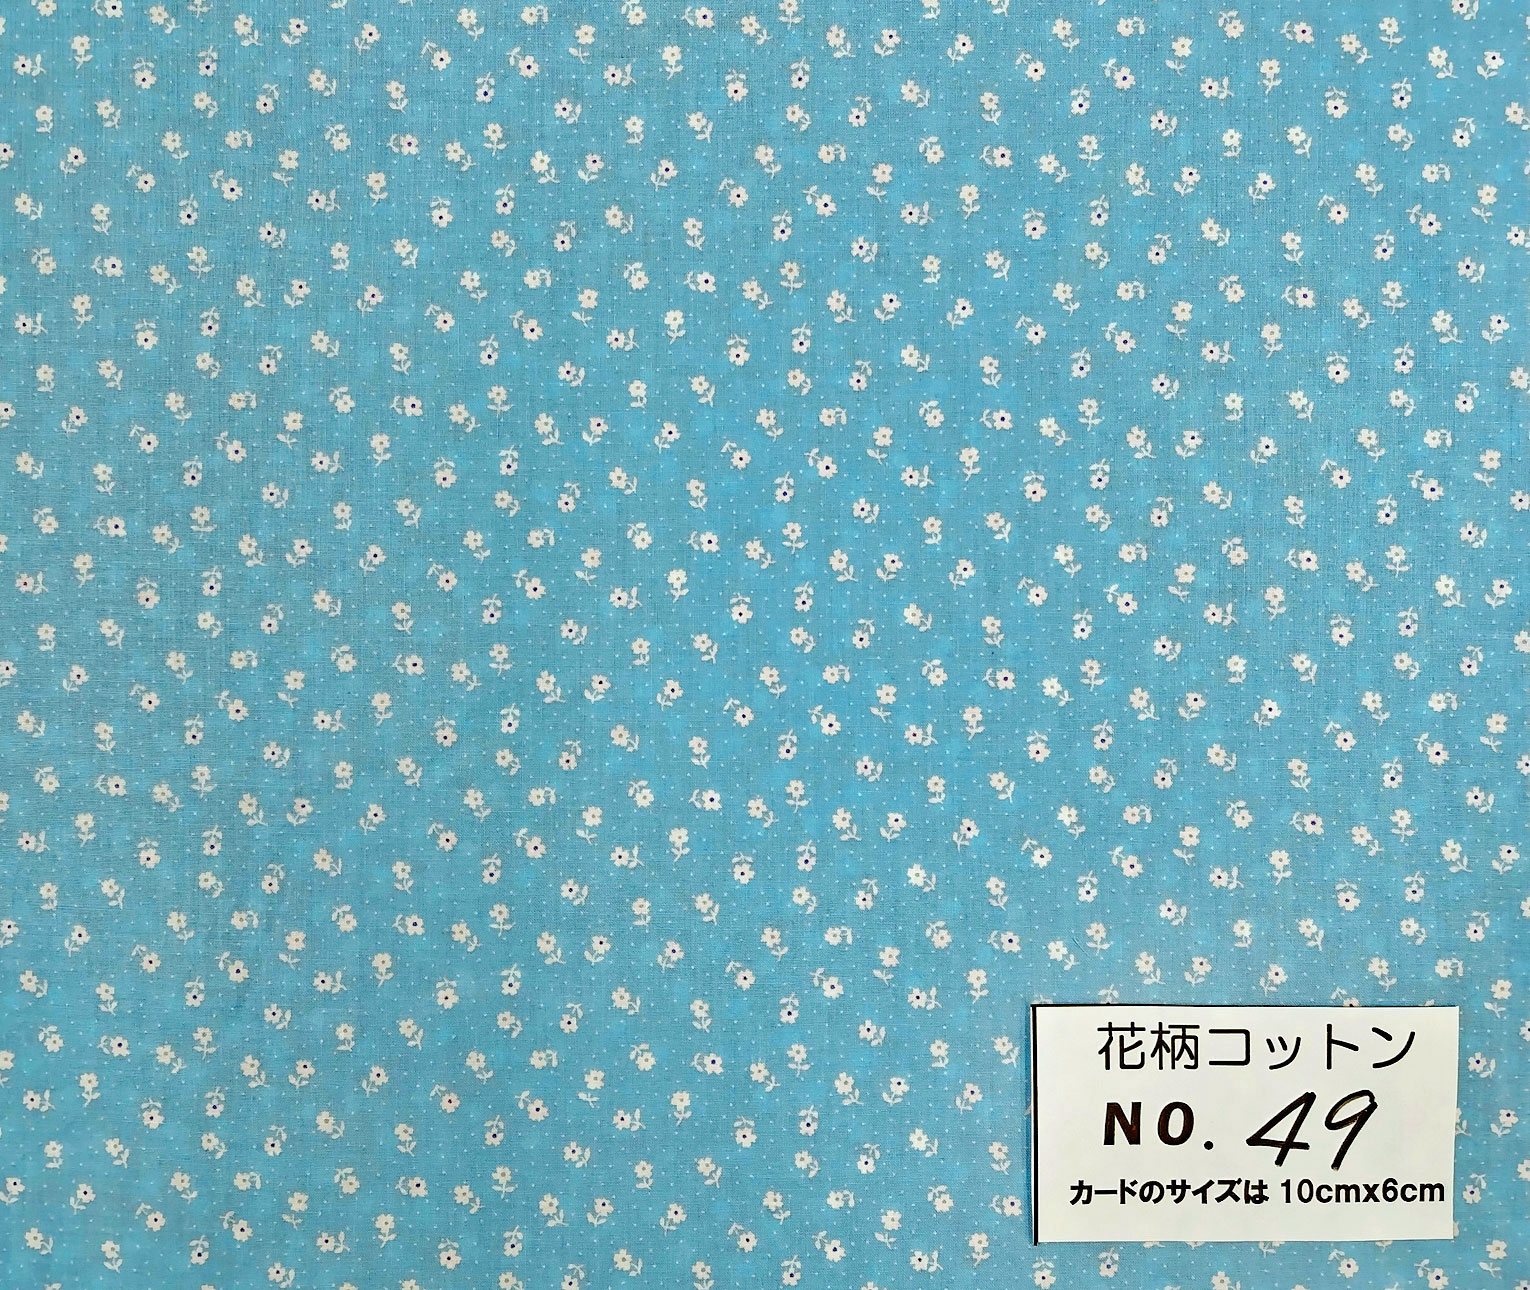  cloth Matsuyama ..YUWA small flower dot Bright Flower have wheel special price floral print cotton *49 *55cmX45cm